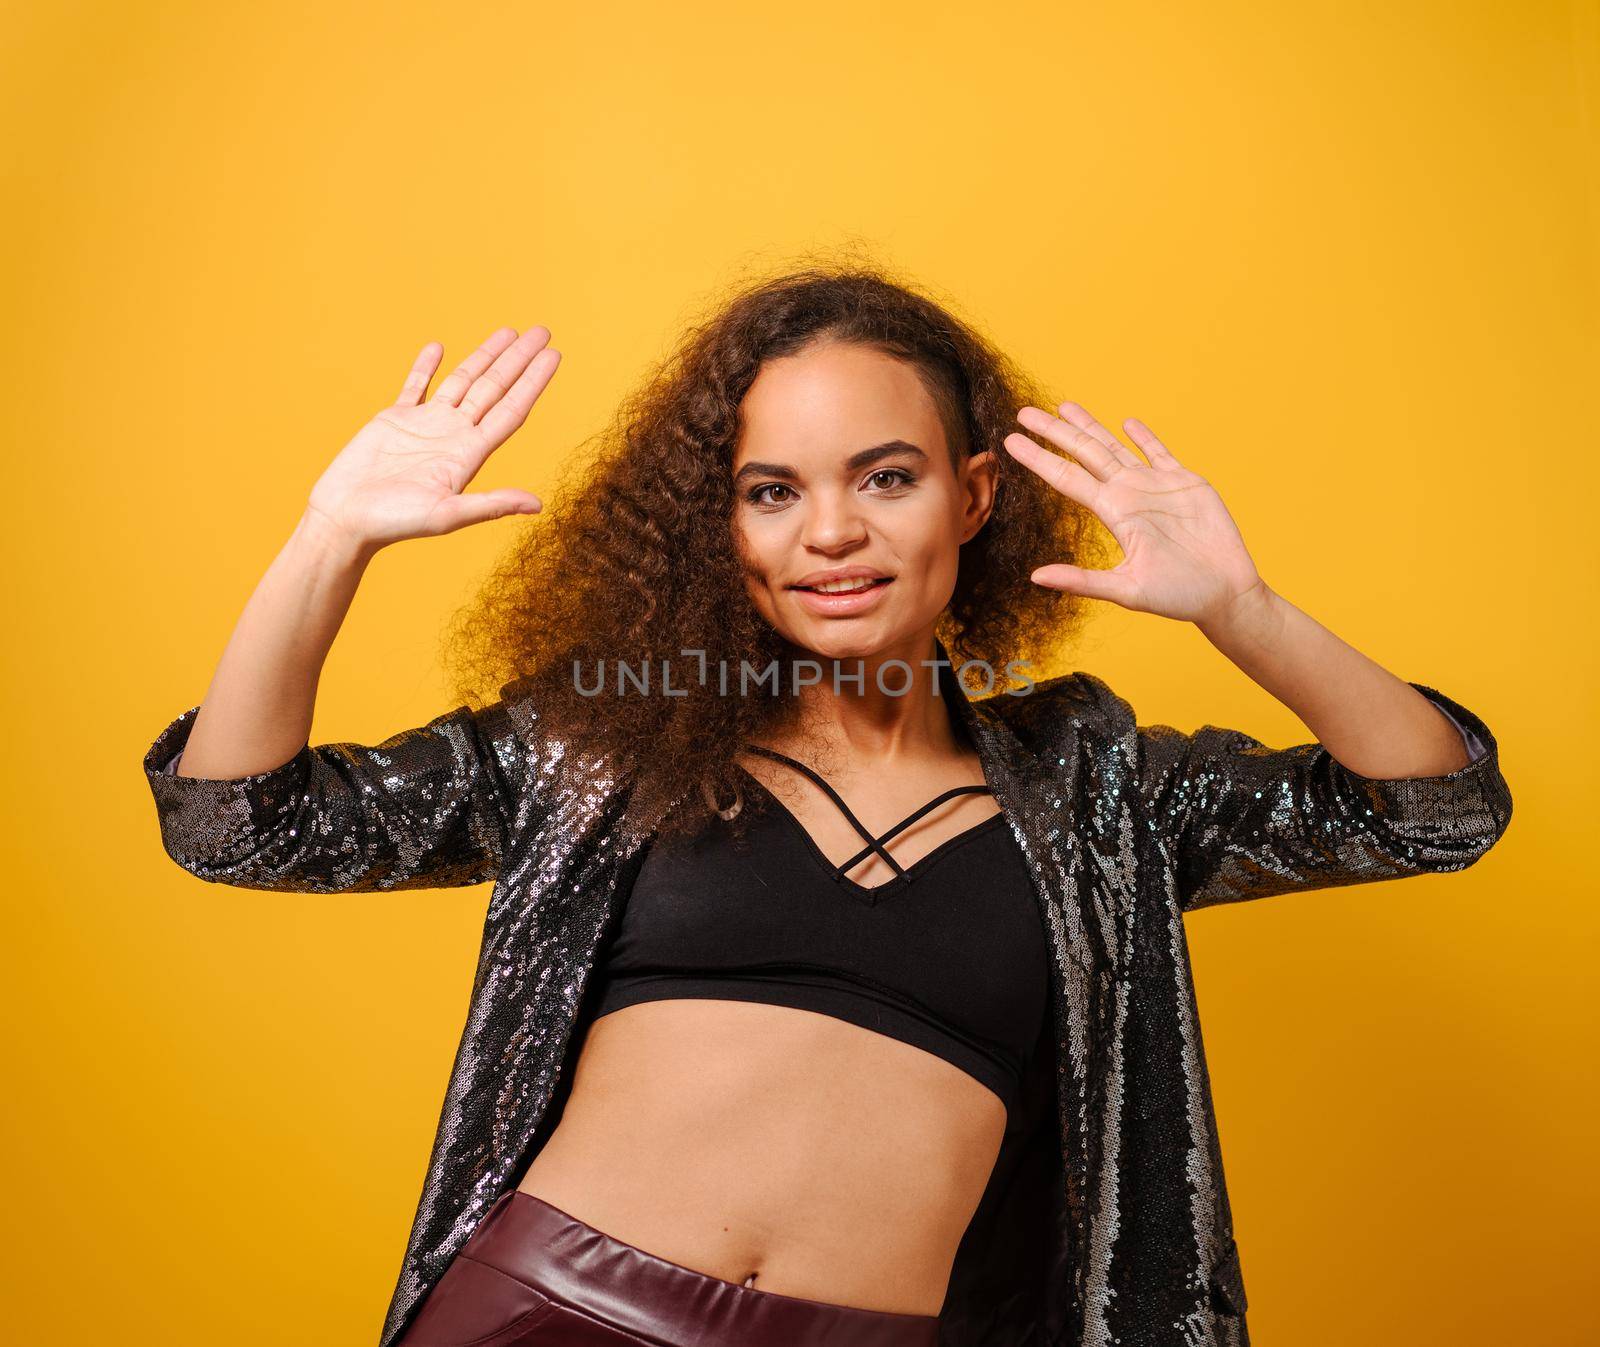 Fashion beautiful African American model young woman with long curly hair posing dancing on camera with hands up wearing shiny jacket and black top. Photo of young african woman on yellow background.